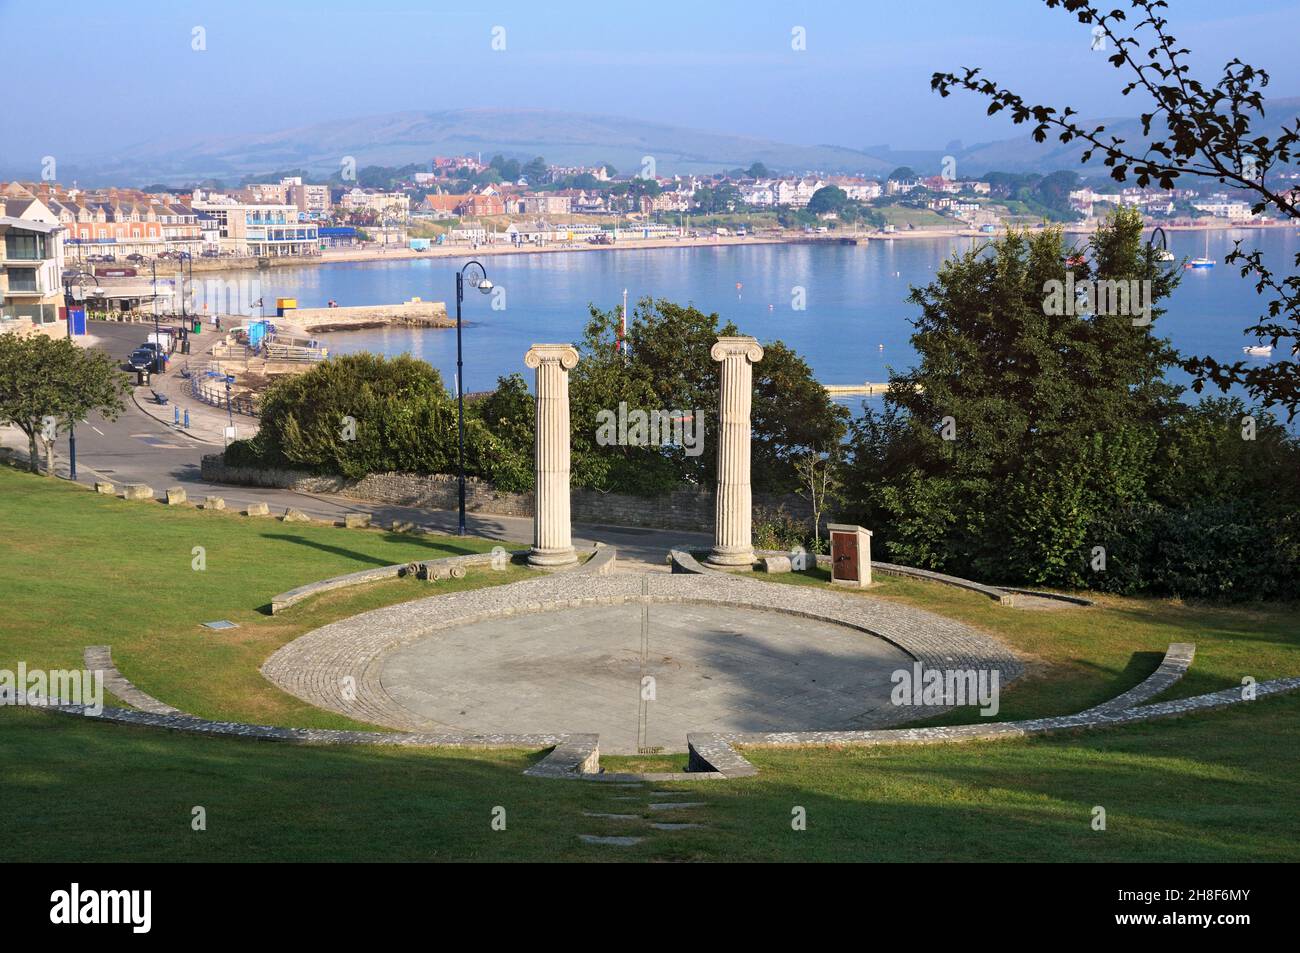 View from Prince Albert Gardens with its mock Roman ampitheatre overlooking the town and coastline of Swanage, Isle of Purbeck, Dorset, England, UK Stock Photo